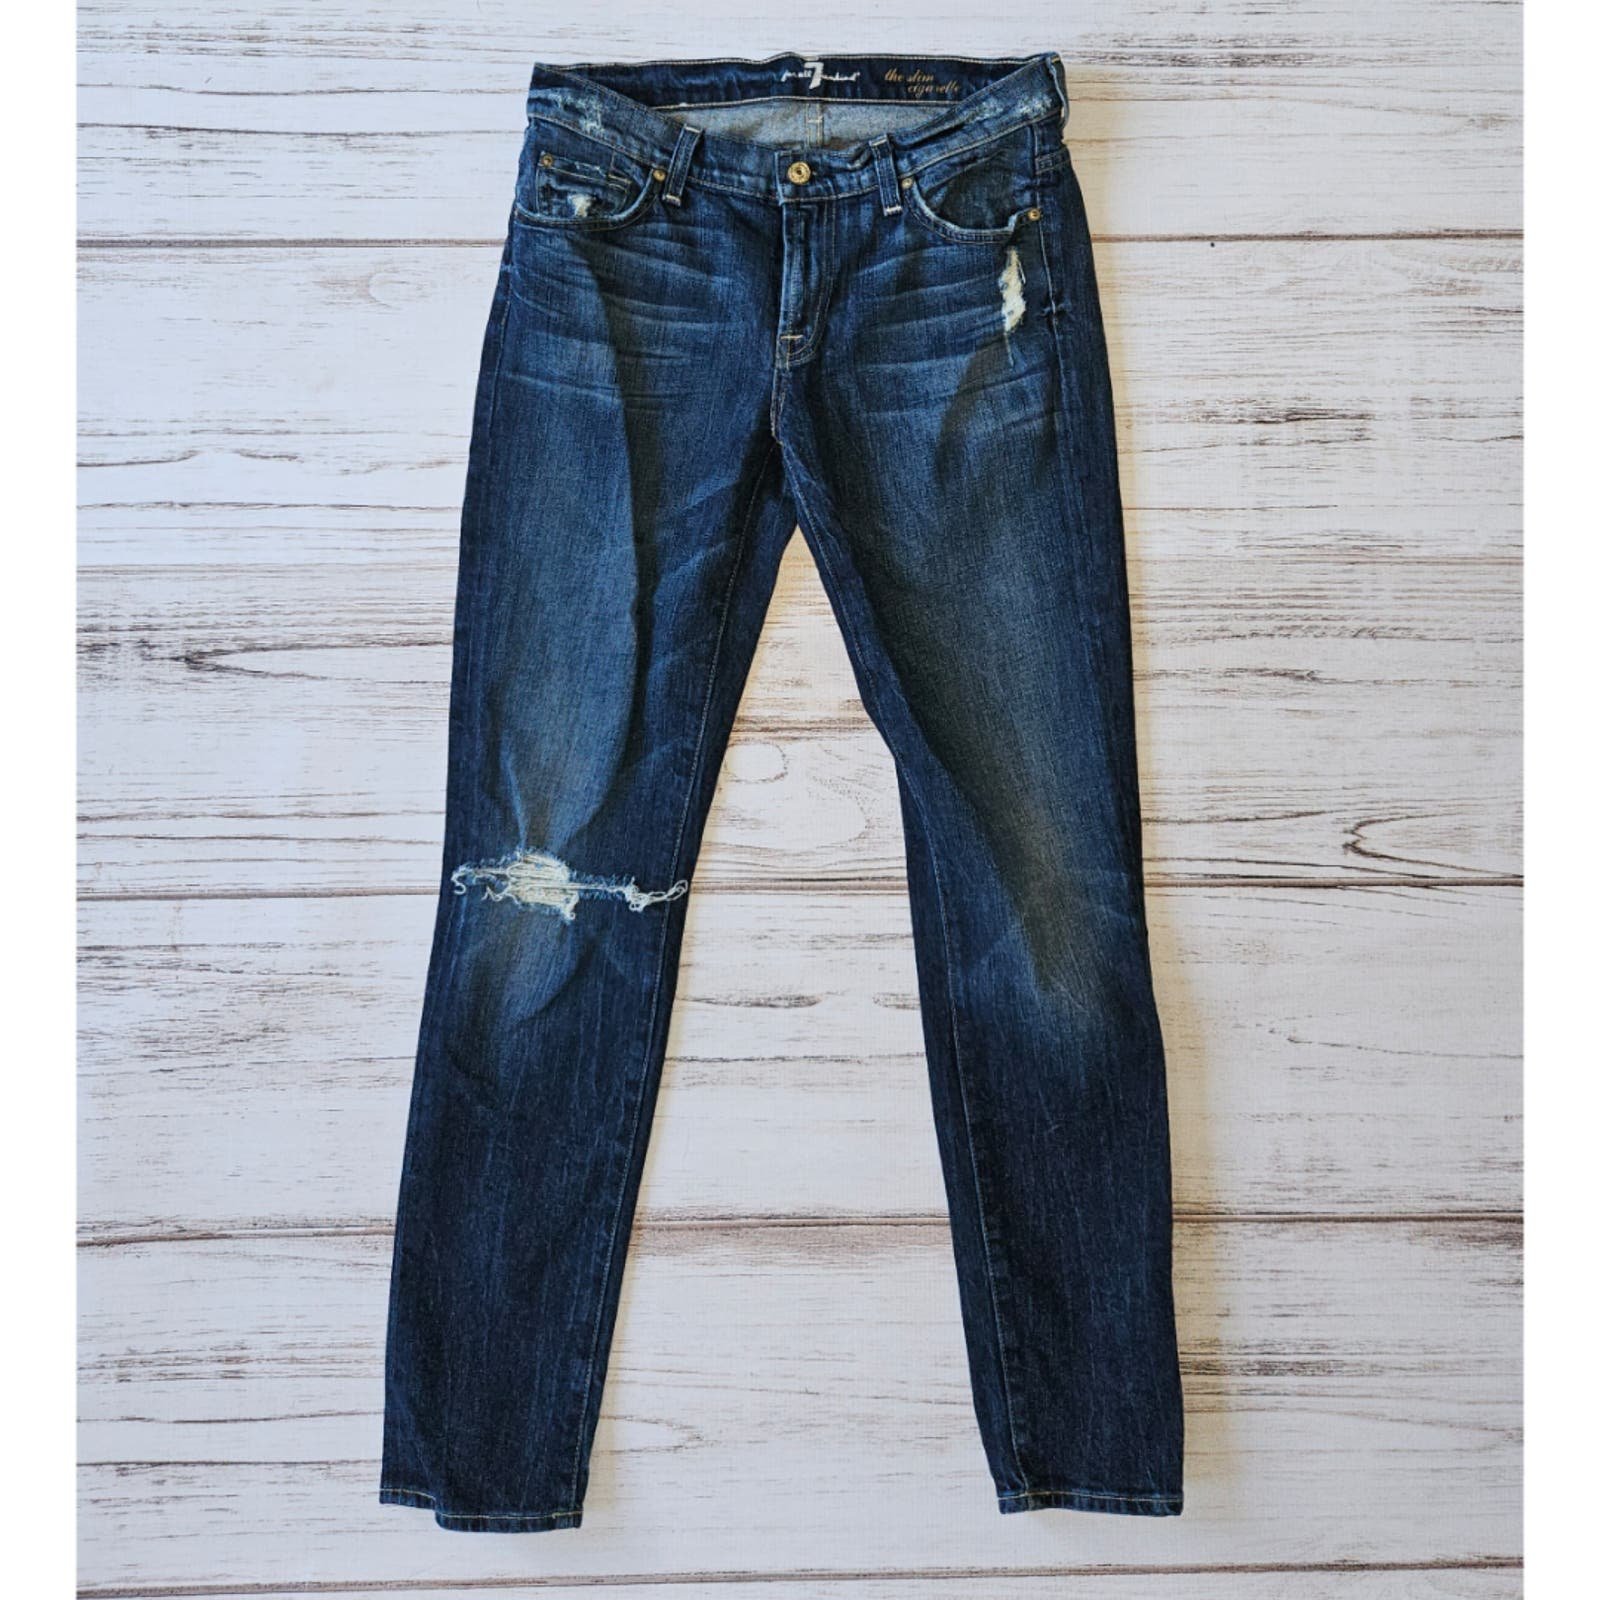 Stylish 7 for All Mankind The Slim Cigarette Distressed Straight Leg Jeans sz 28 jJRqkjkEg all for you